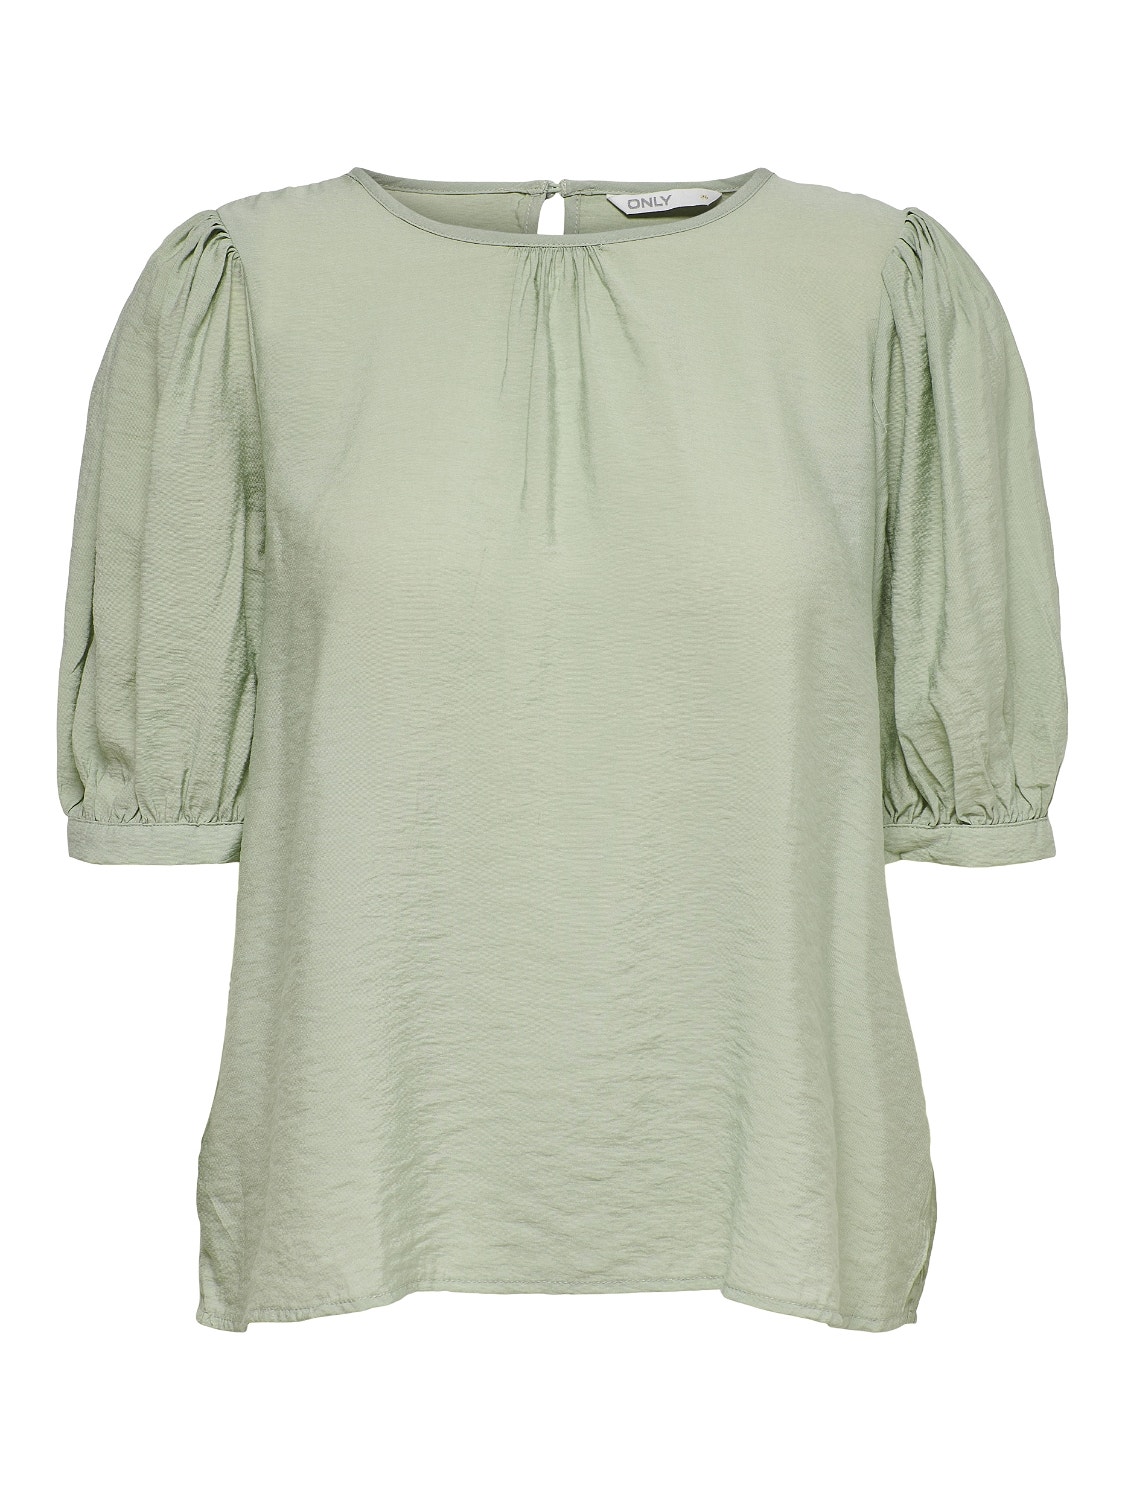 ONLY Regular Fit O-Neck Puff sleeves Top -Jadeite - 15219685